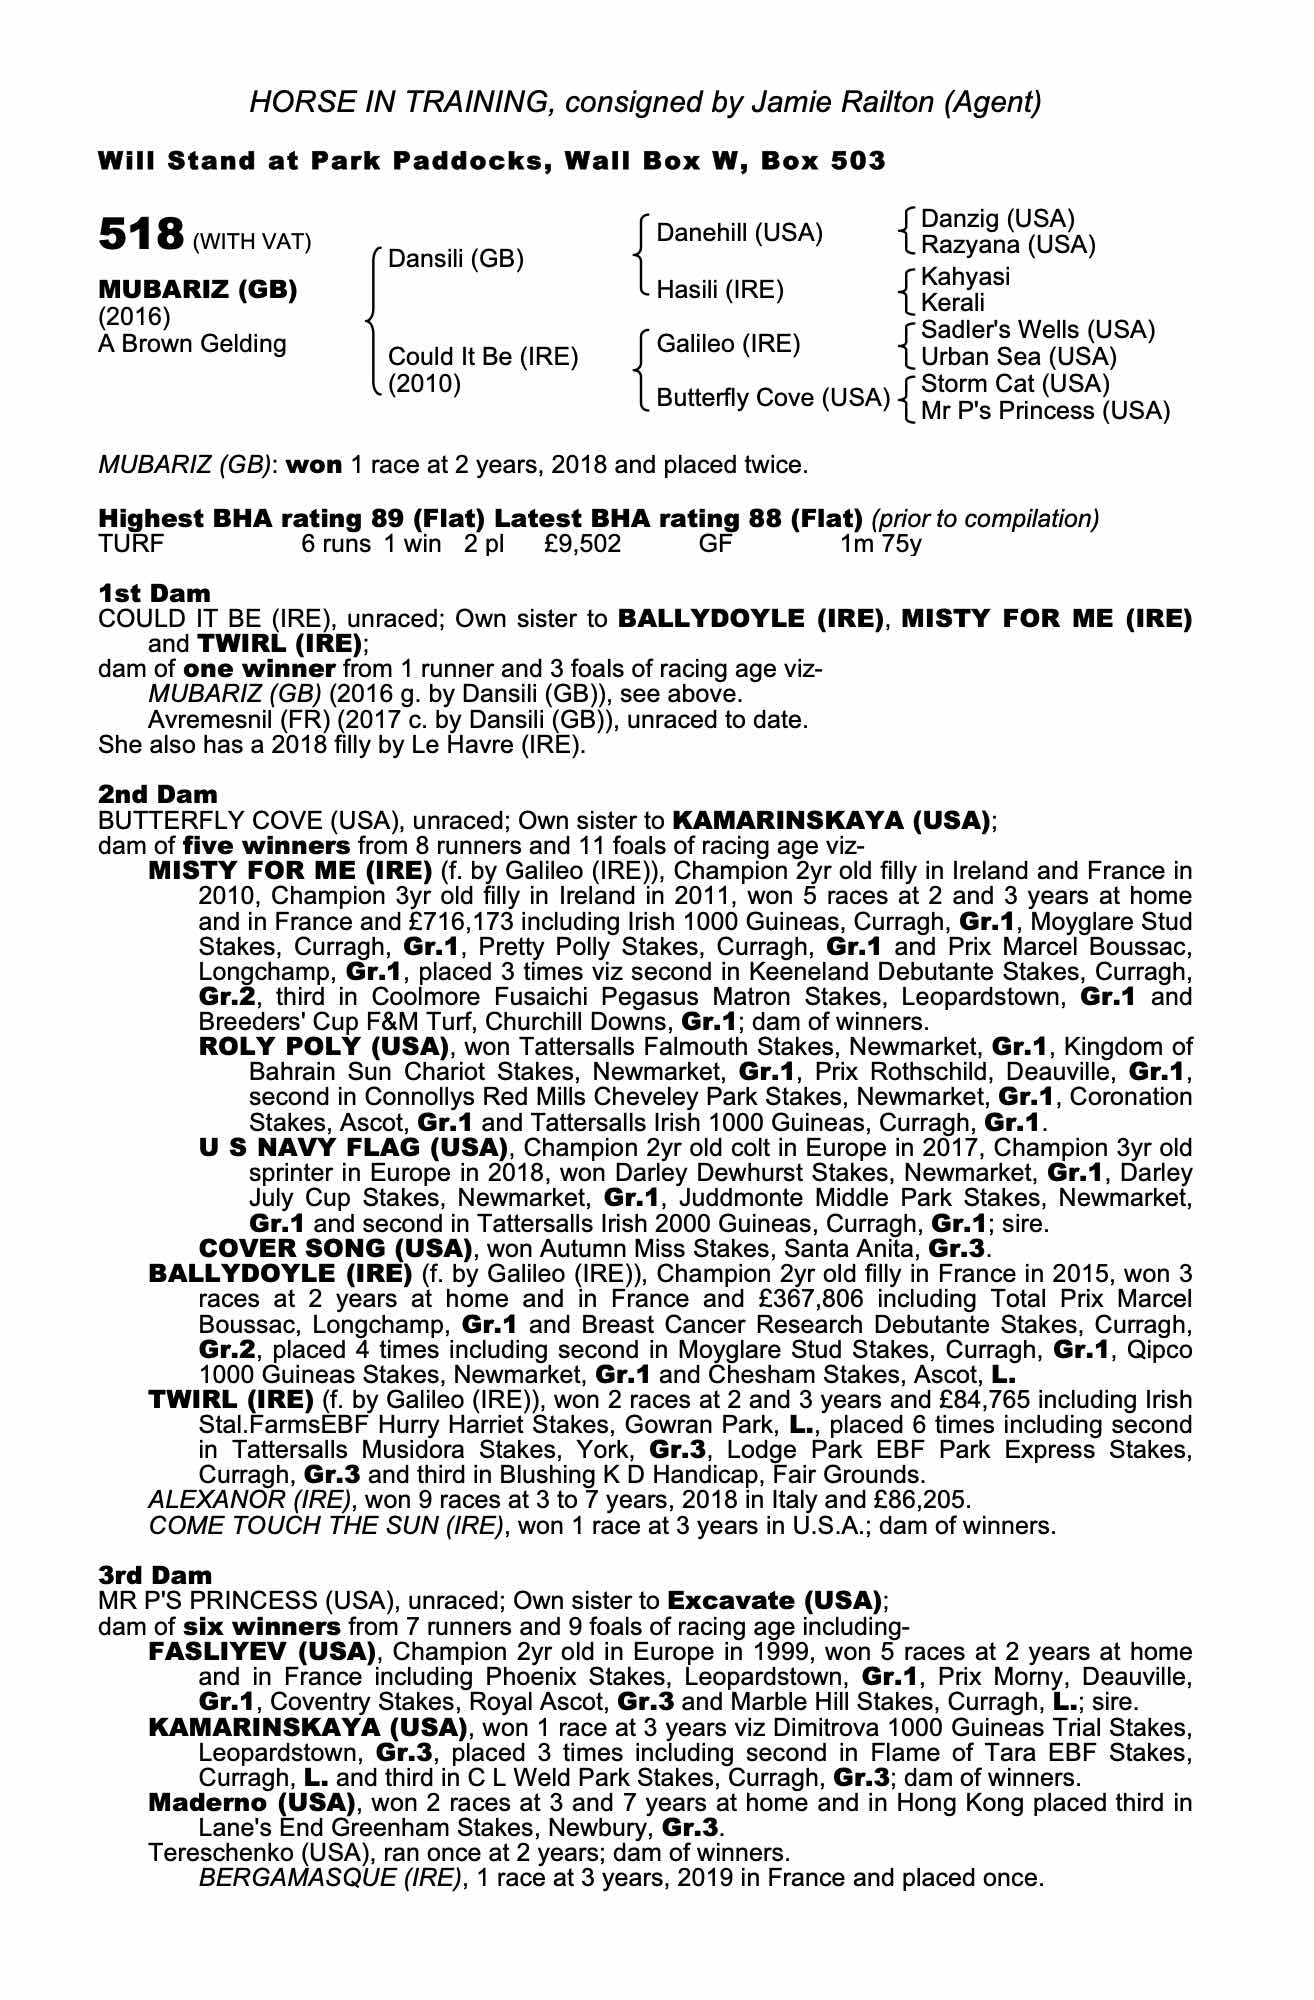 Br G Back To List Pdf Purchaser Go Racing Price 40 000 Gns Consignor Jamie Railton Agent Documentation Flu Vaccinations P1 Flu Vaccinations P2 Health Certificate